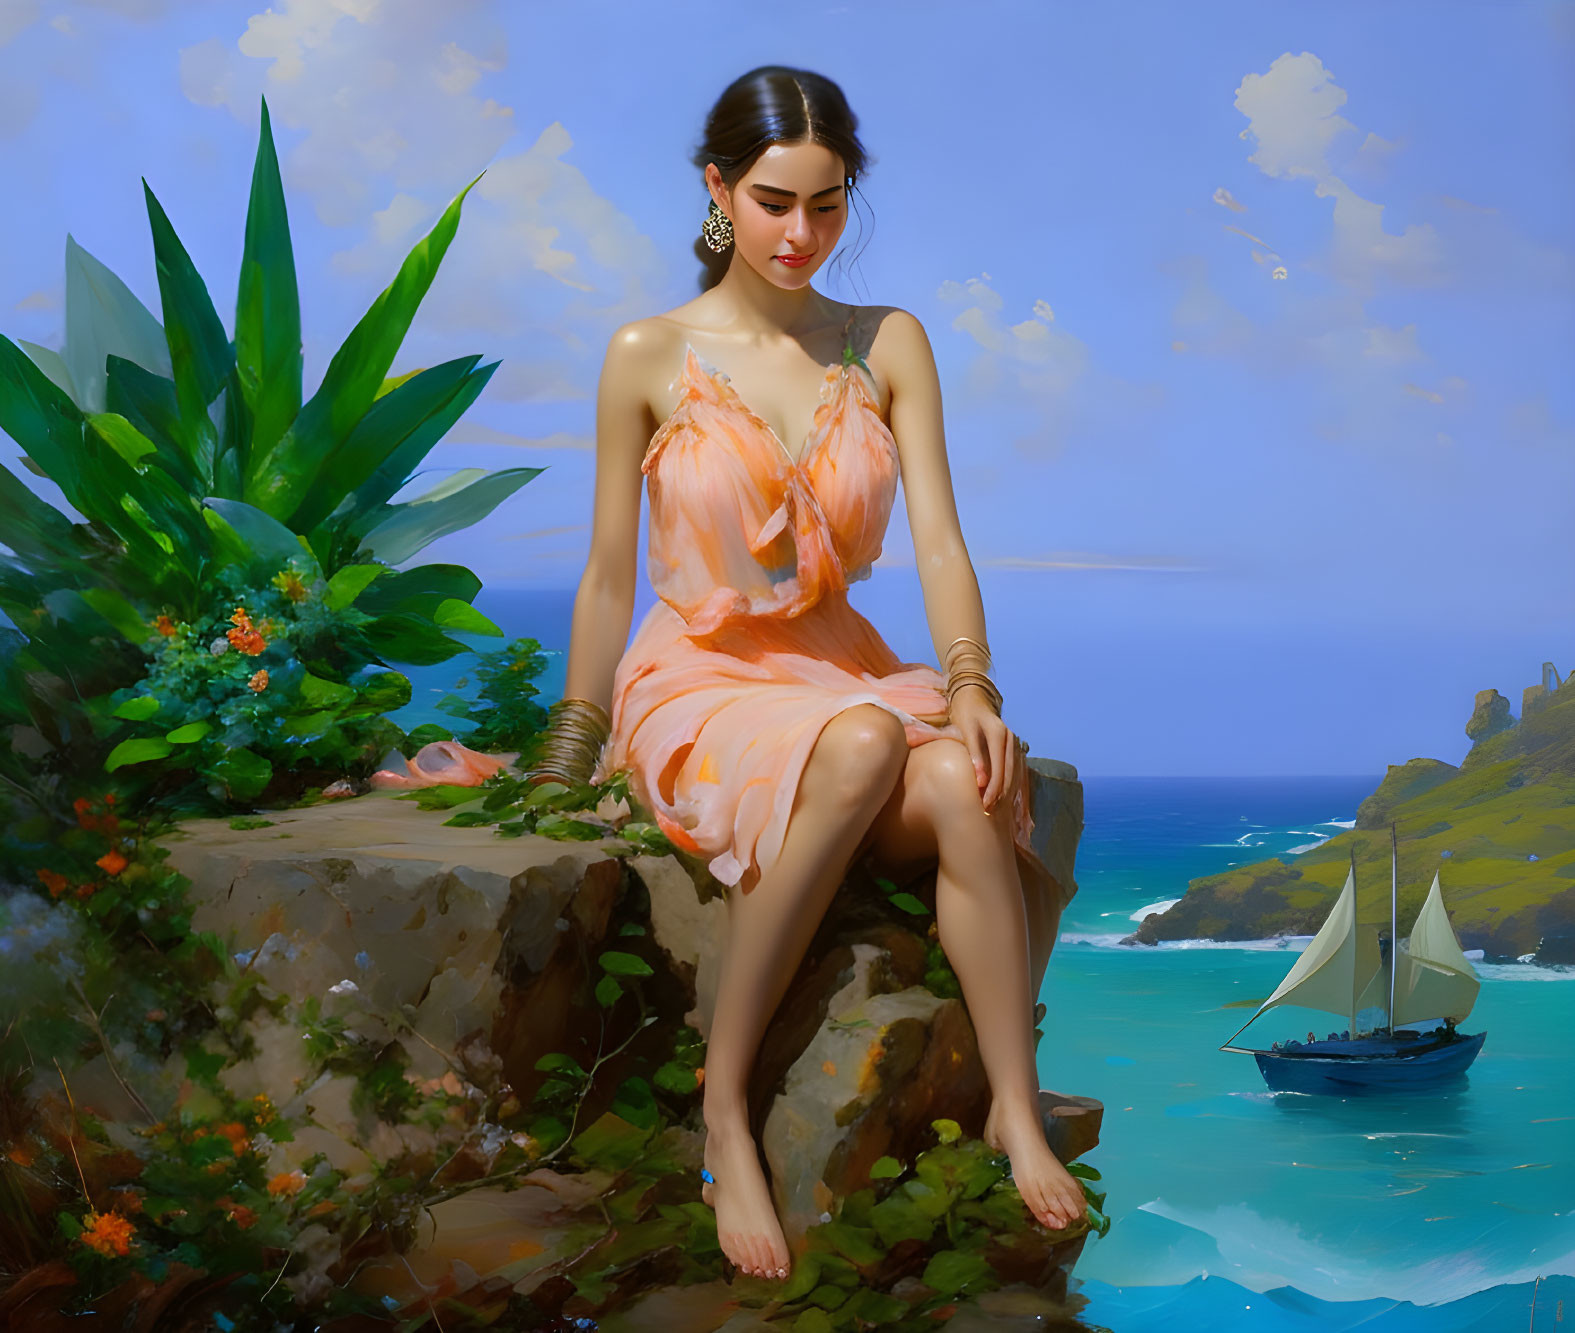 Tranquil seascape with woman in orange dress on rocky outcrop